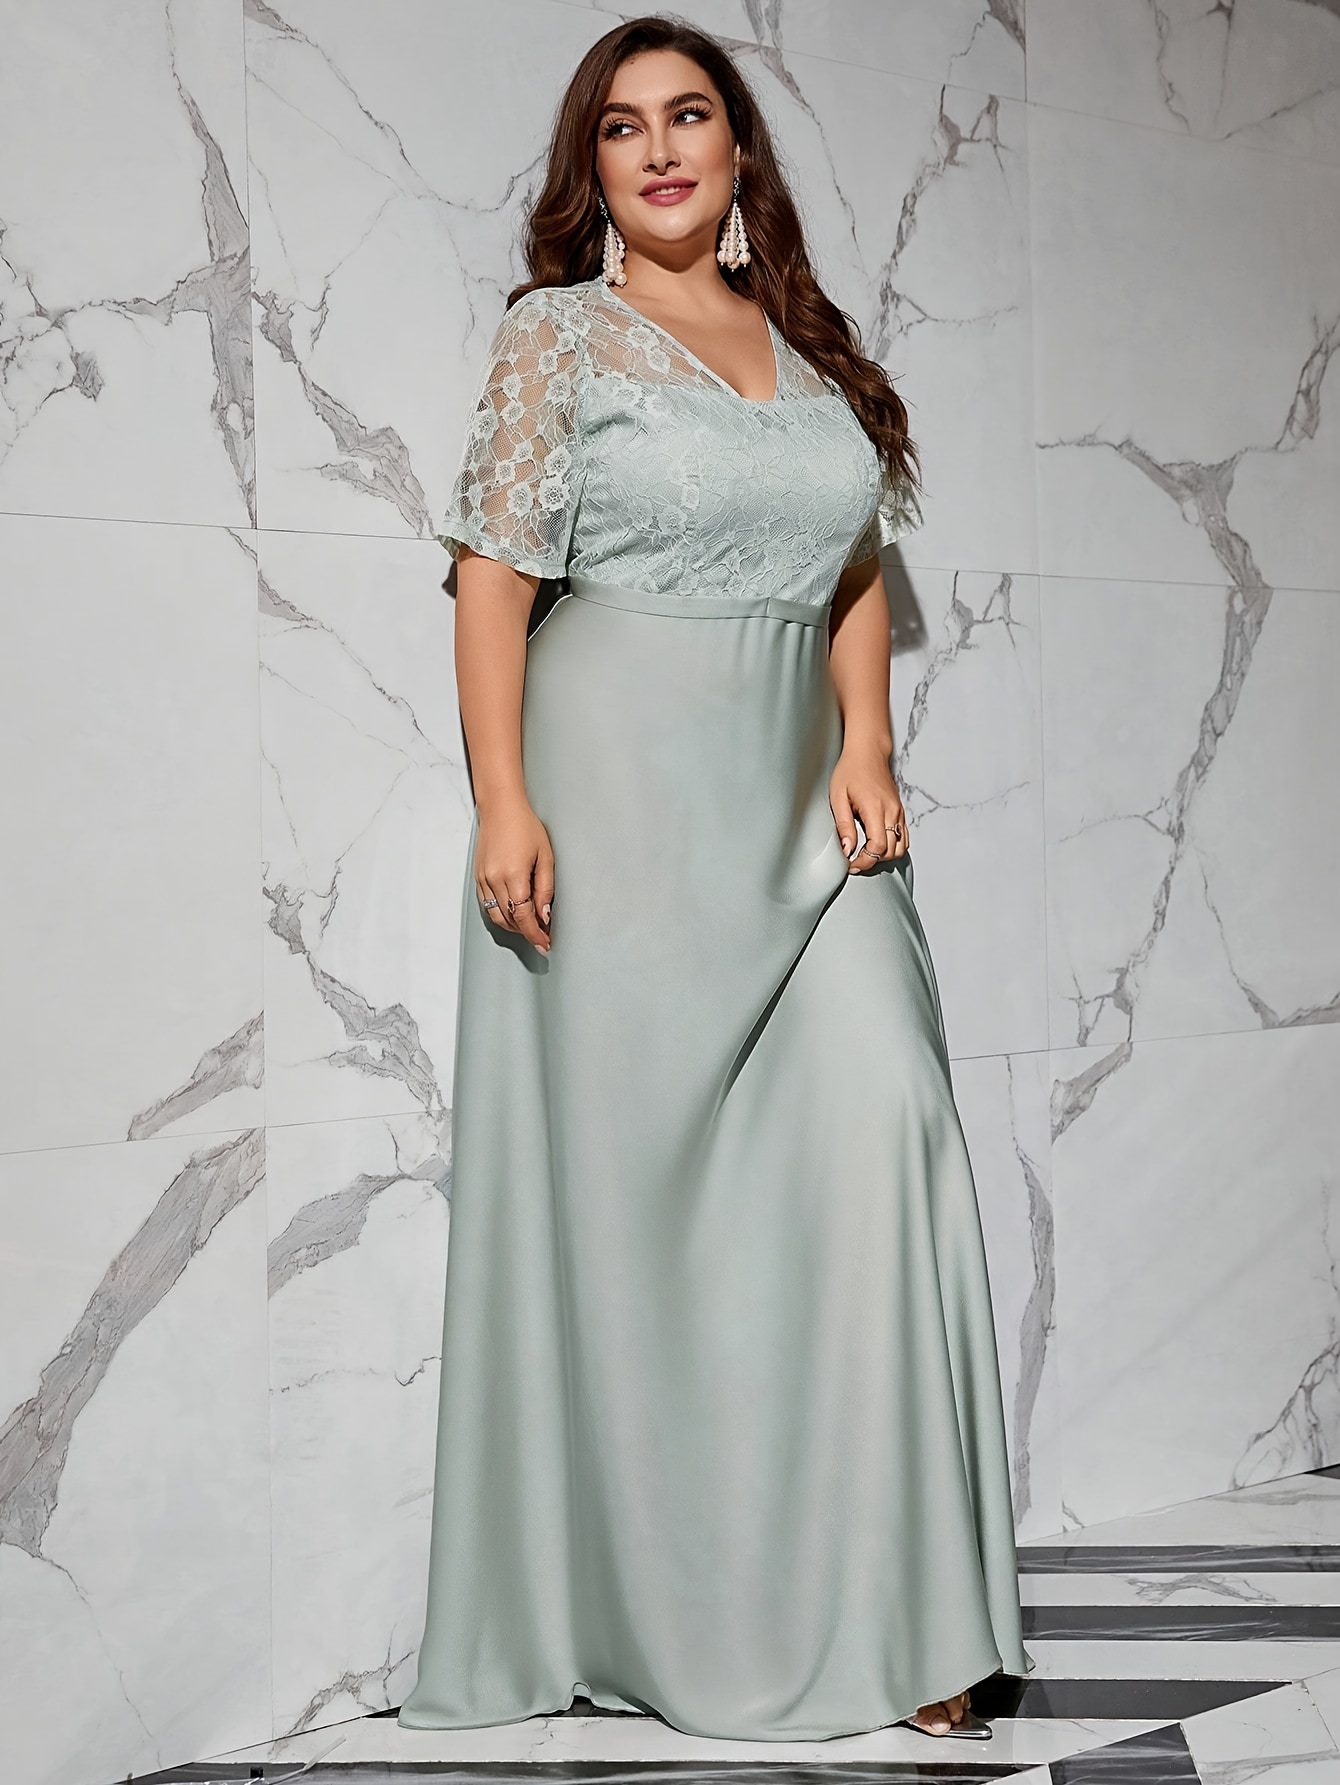 Plus Size Contrast Lace Mother Of The Bride Dress, Elegant V Neck Illusion  Sleeve Court Gown For Wedding Party, Women's Plus Size Clothing